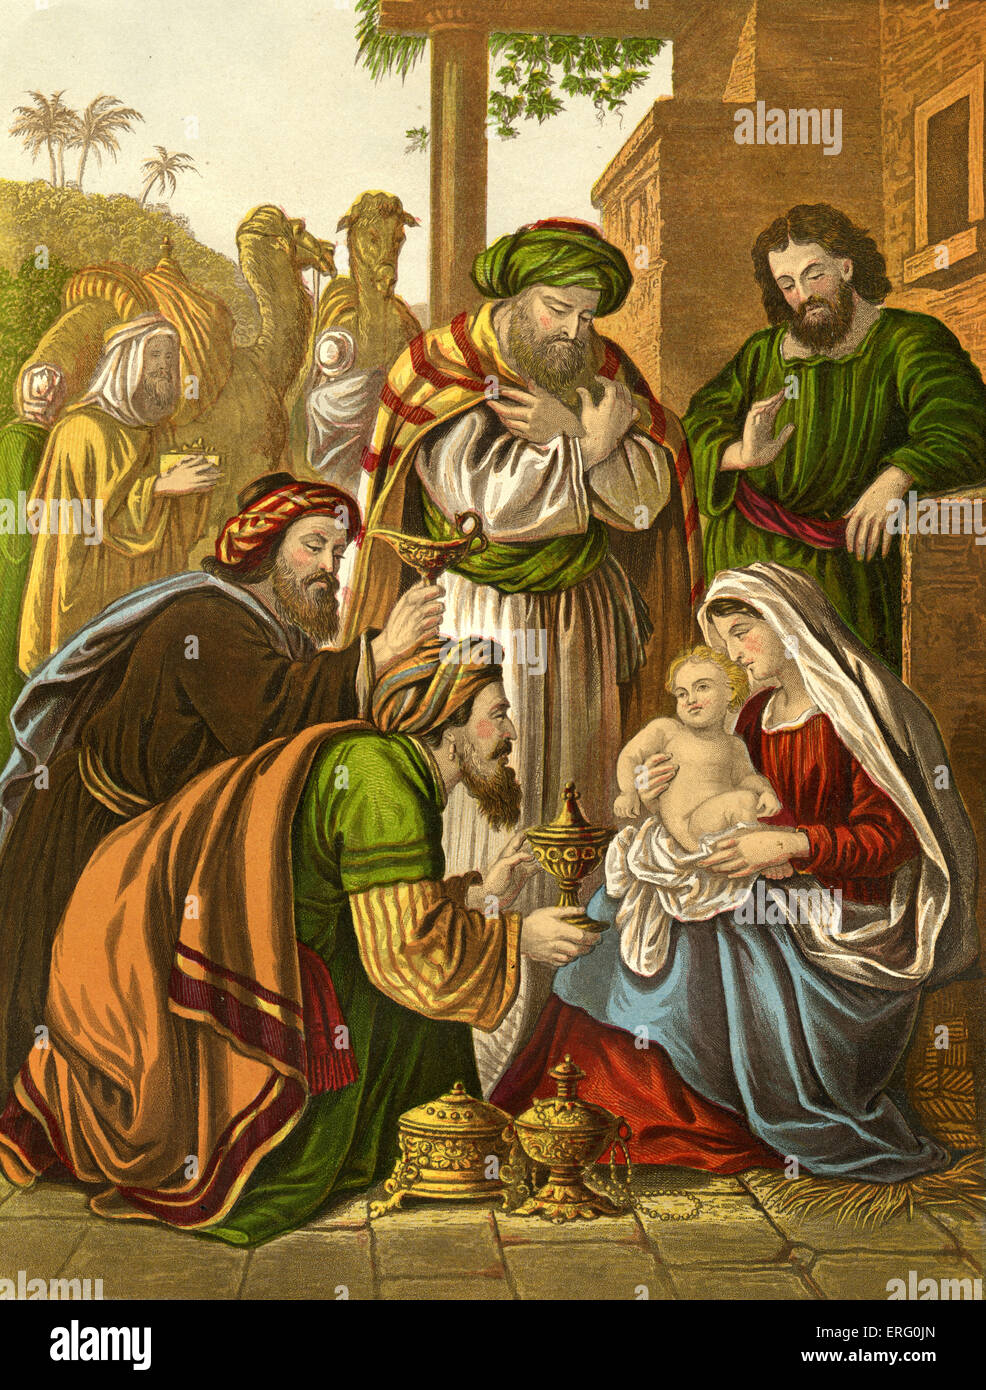 The Wise Men visit the baby Jesus 'And they came into the house and saw the young child with Mary his mother; and they fell down and worshipped him; and opening their treasures they offered unto him gifts, gold and frakincense and myrrh'. Matthew II, 9-11 Stock Photo